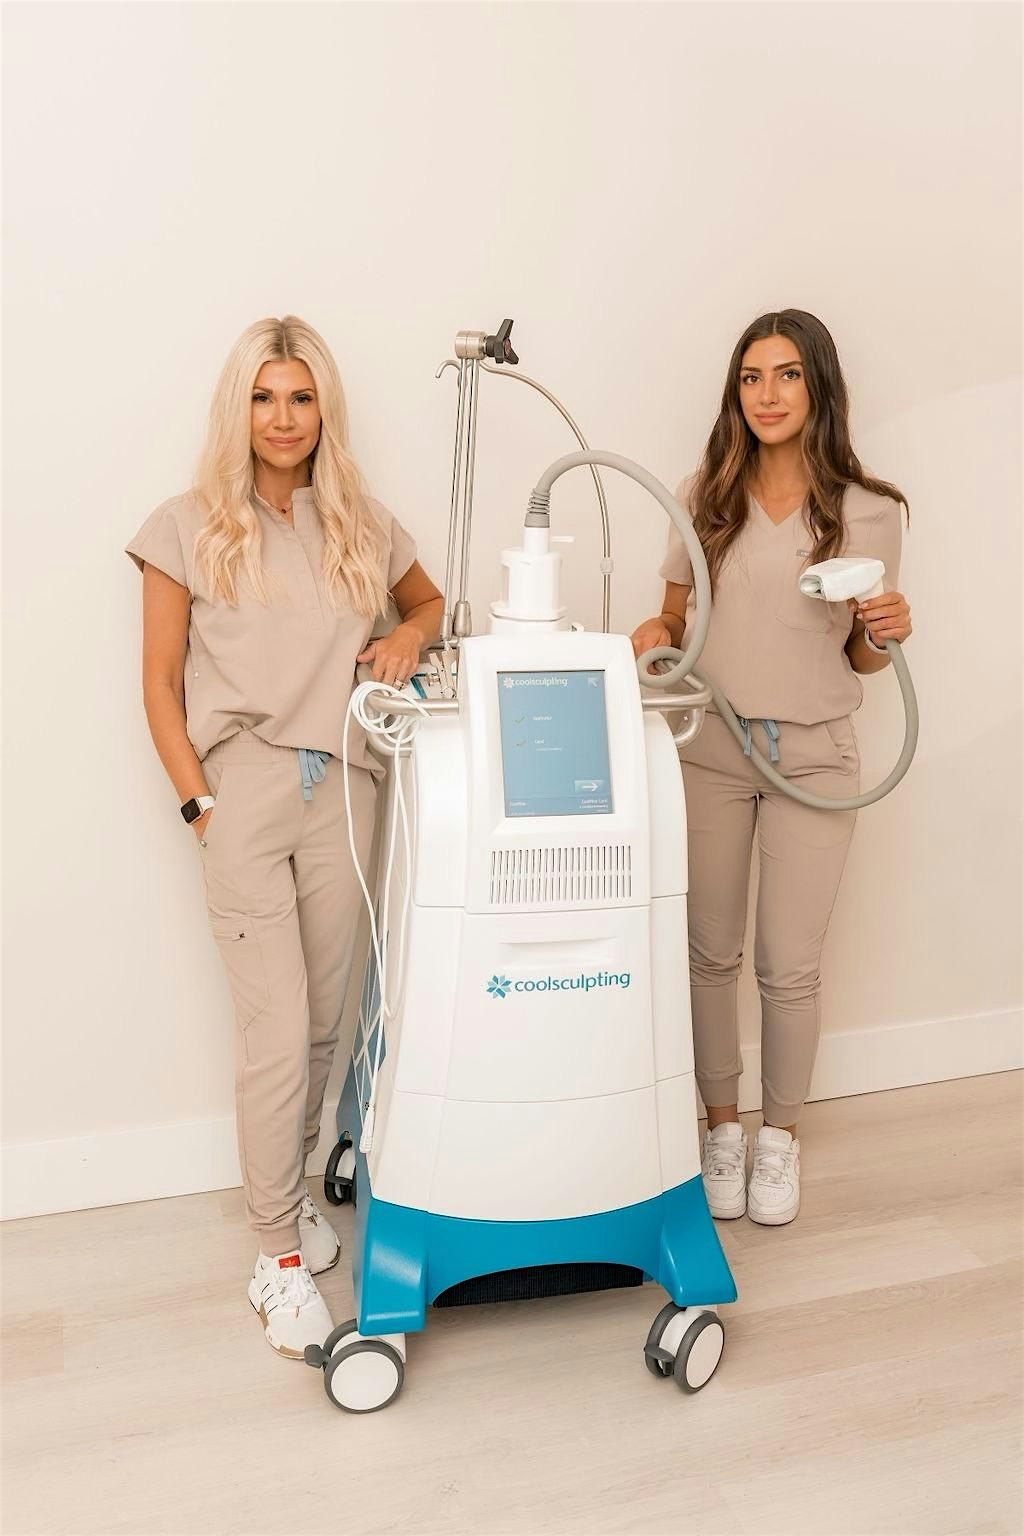 An Evening with CoolSculpting